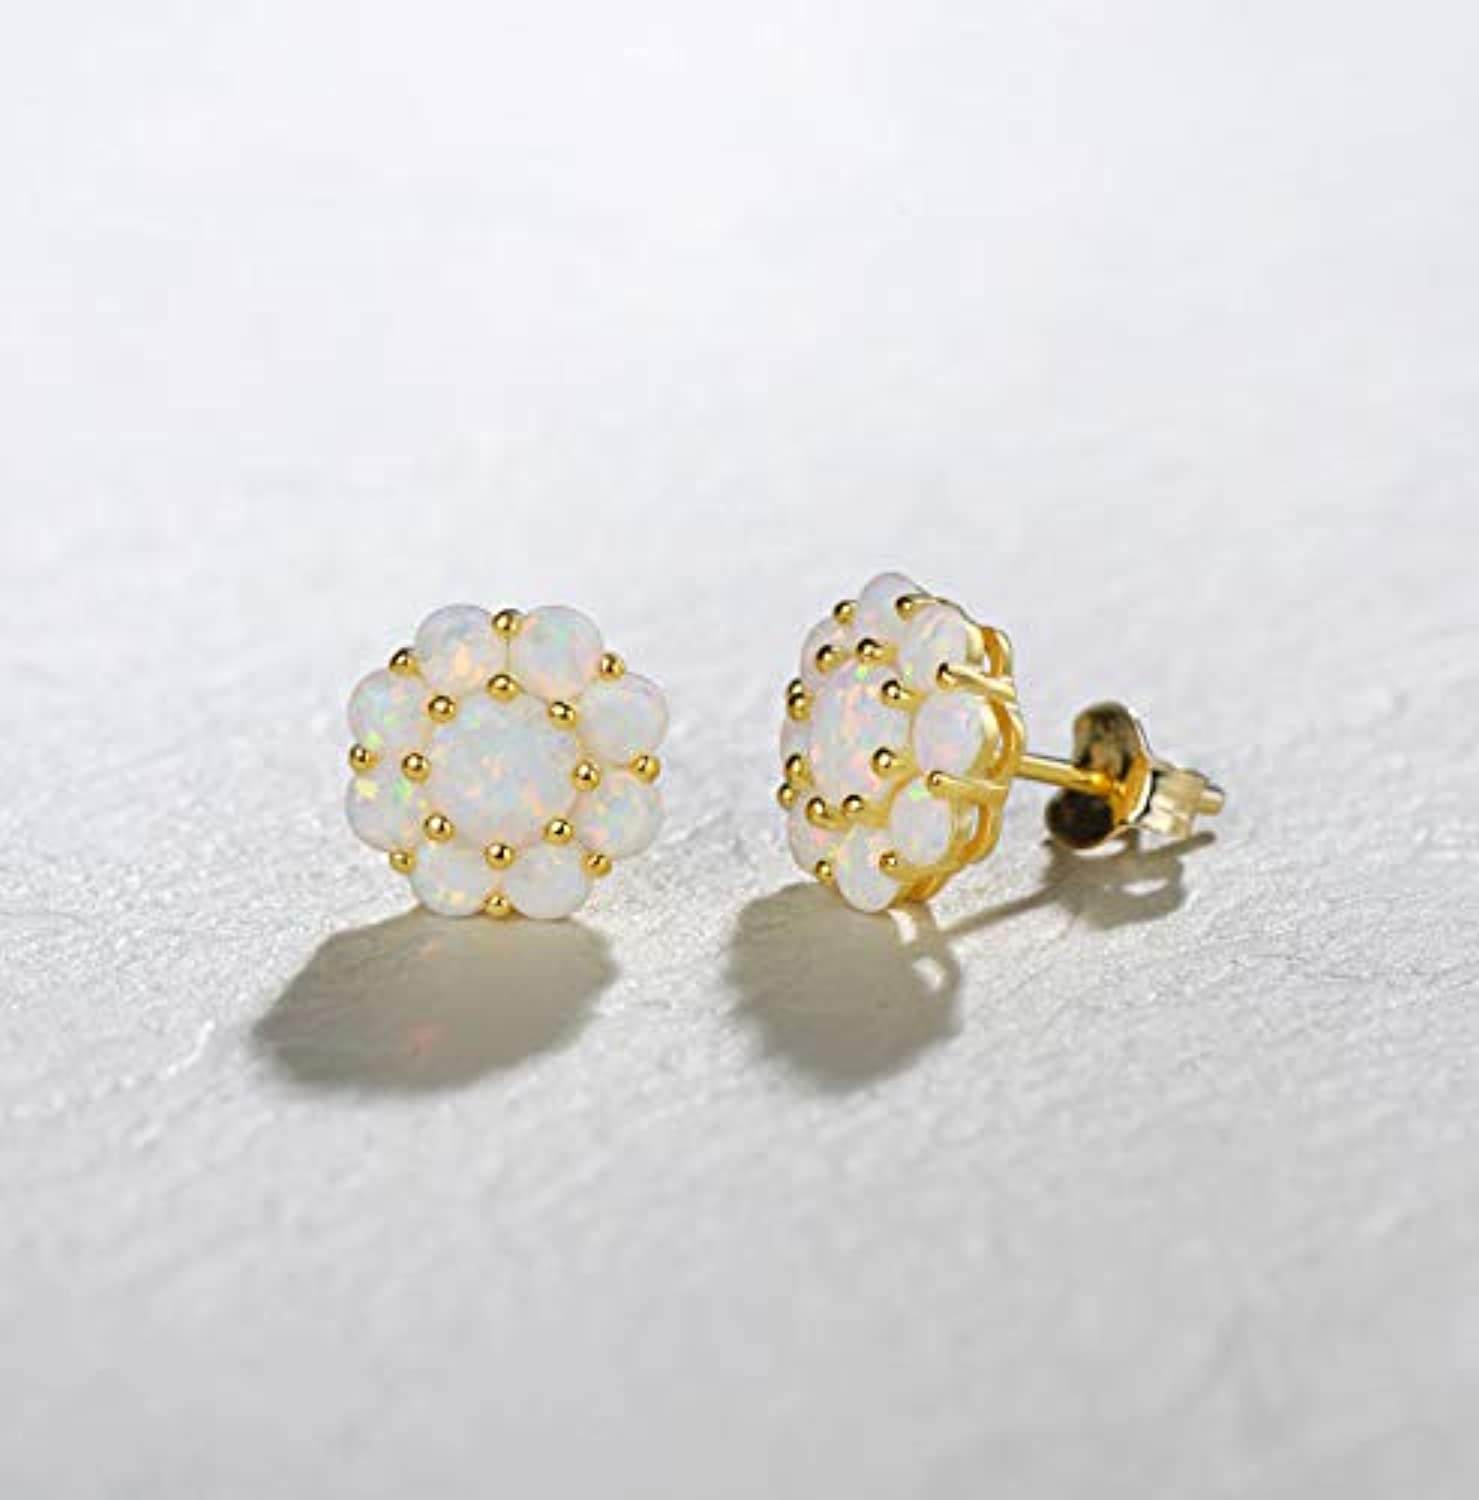 Flower Opal Earrings Stud,Gold Plated or Rhodium Plated Hypoallergenic